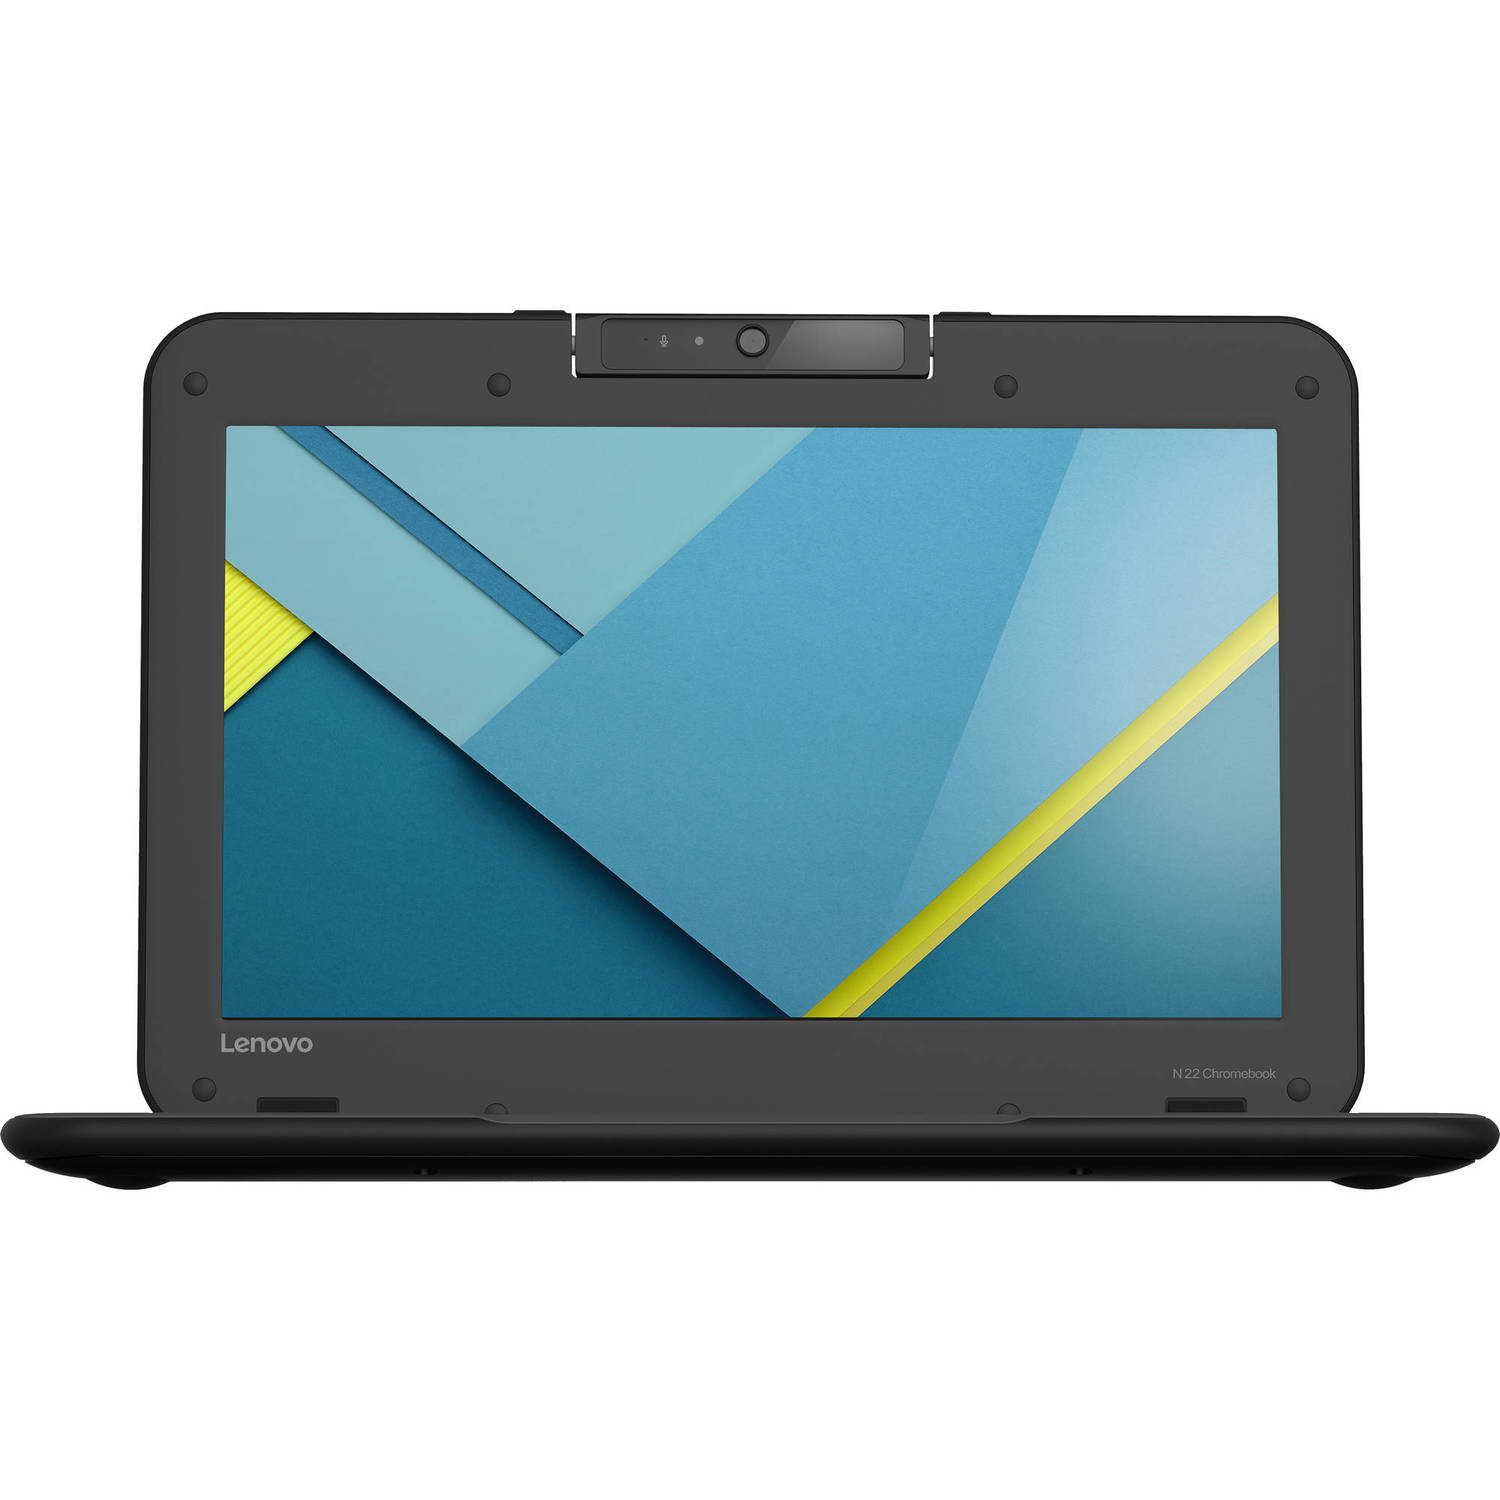 Used Lenovo N22 Series Chromebook 11.6-Inch (2GB RAM, 16GB HDD, Intel Celeron 1.60GHz) + Chromebook Sleeve Case (Scratches & Dents) - image 2 of 5